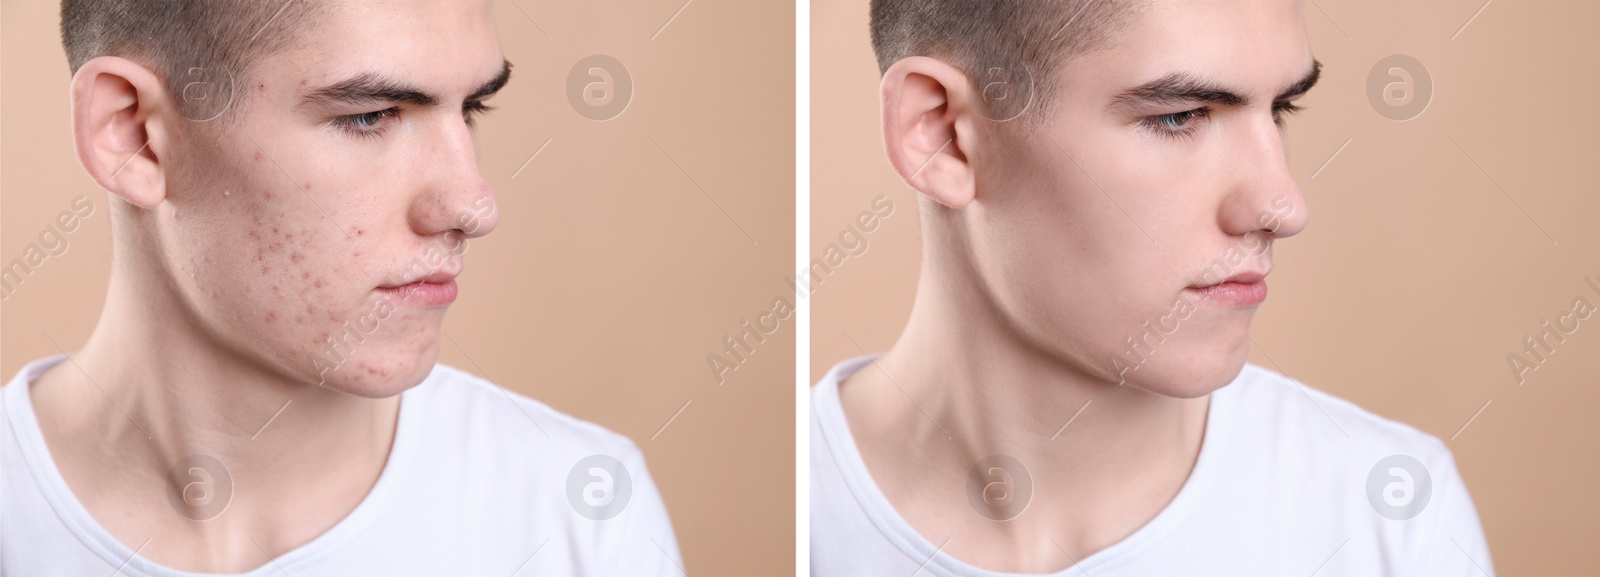 Image of Acne problem. Young man before and after treatment on beige background, collage of photos